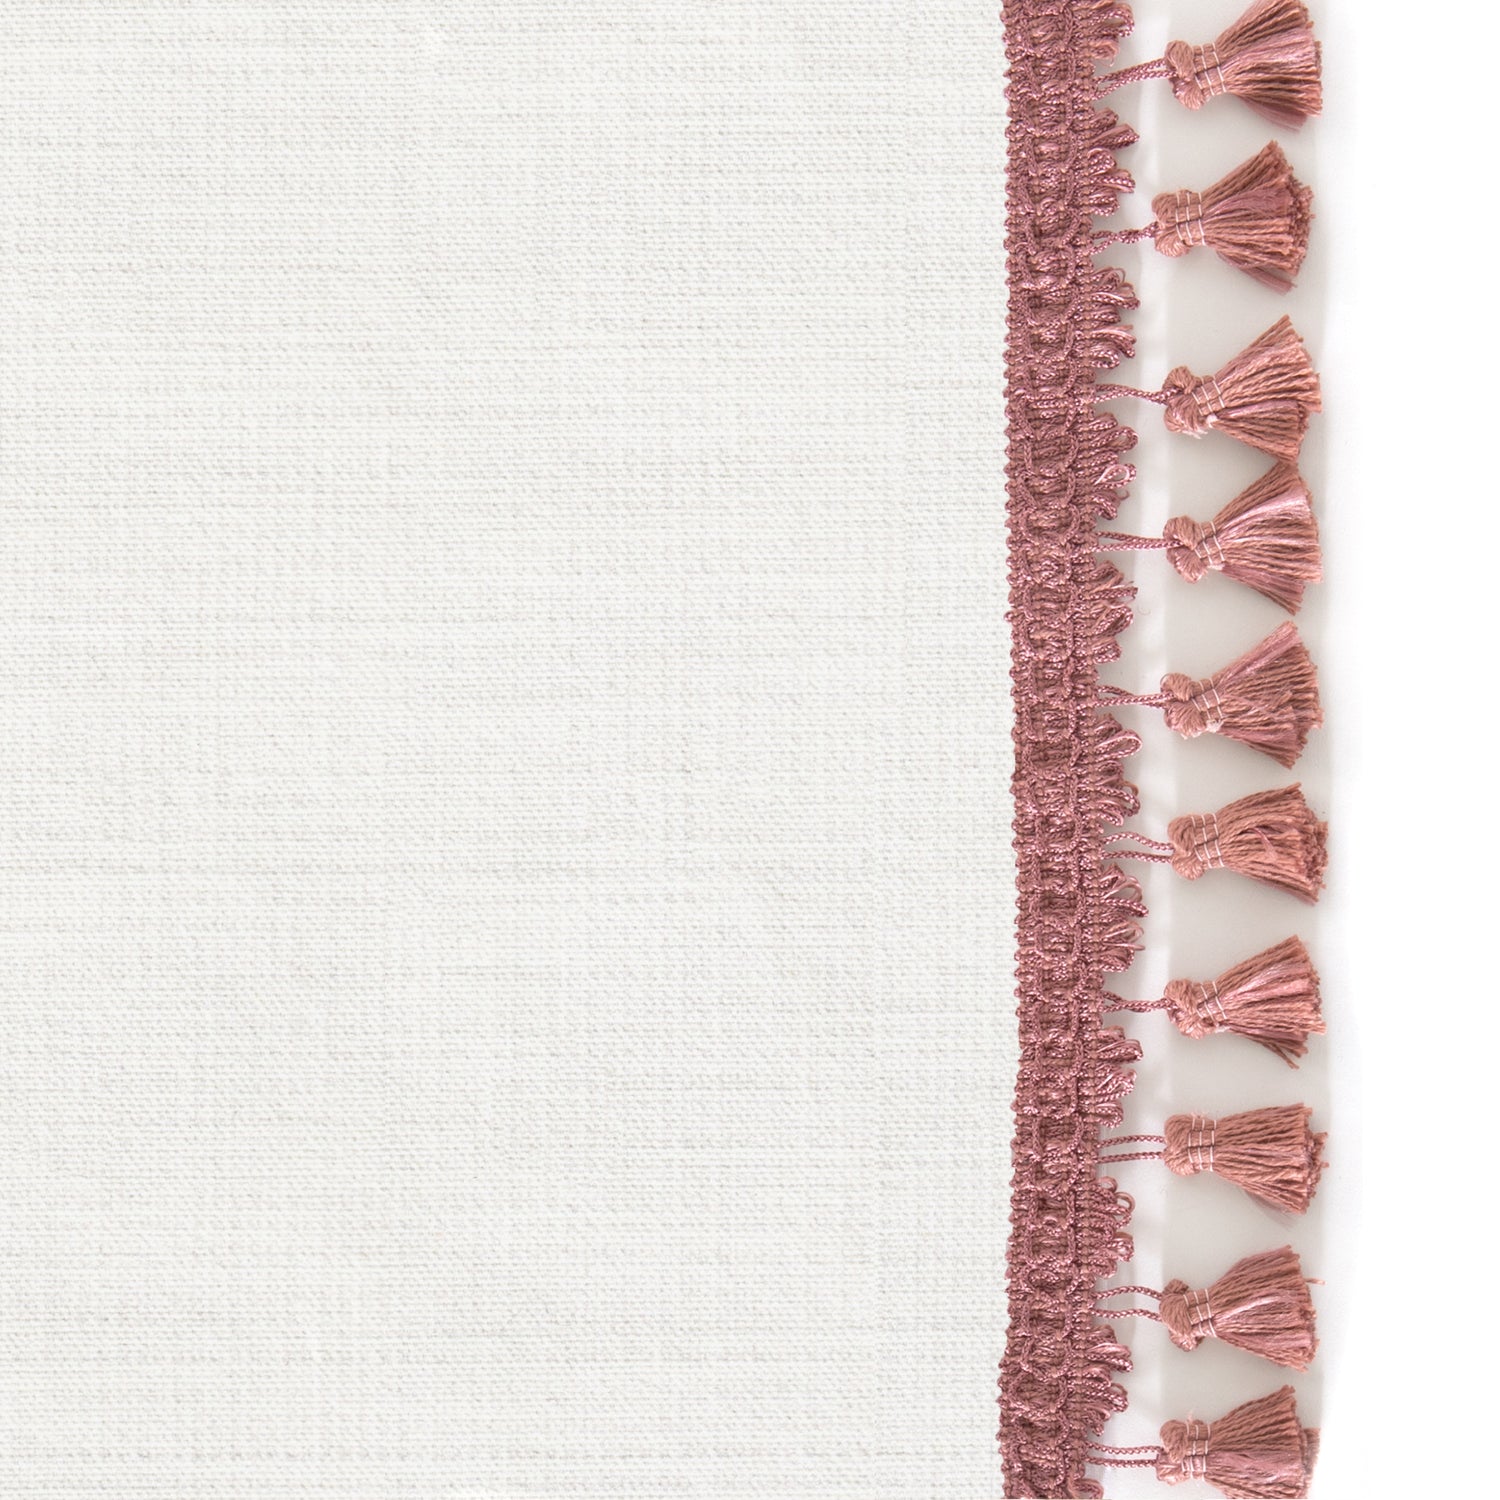 Upclose picture of Snow custom shower curtain with dusty rose tassel trim